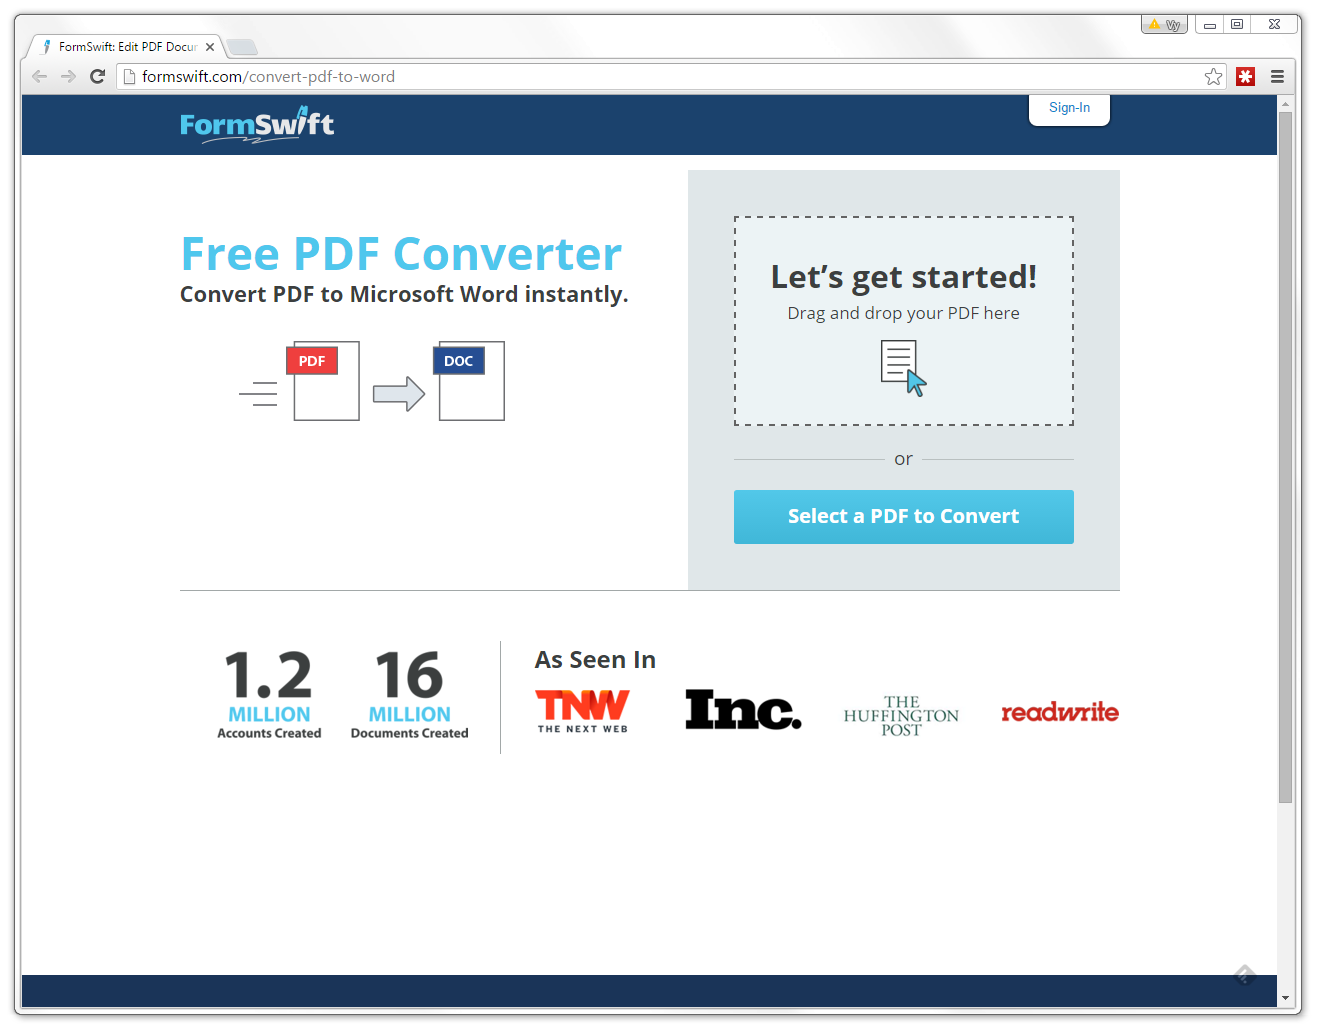 Formswift Free PDF Converter file extensions